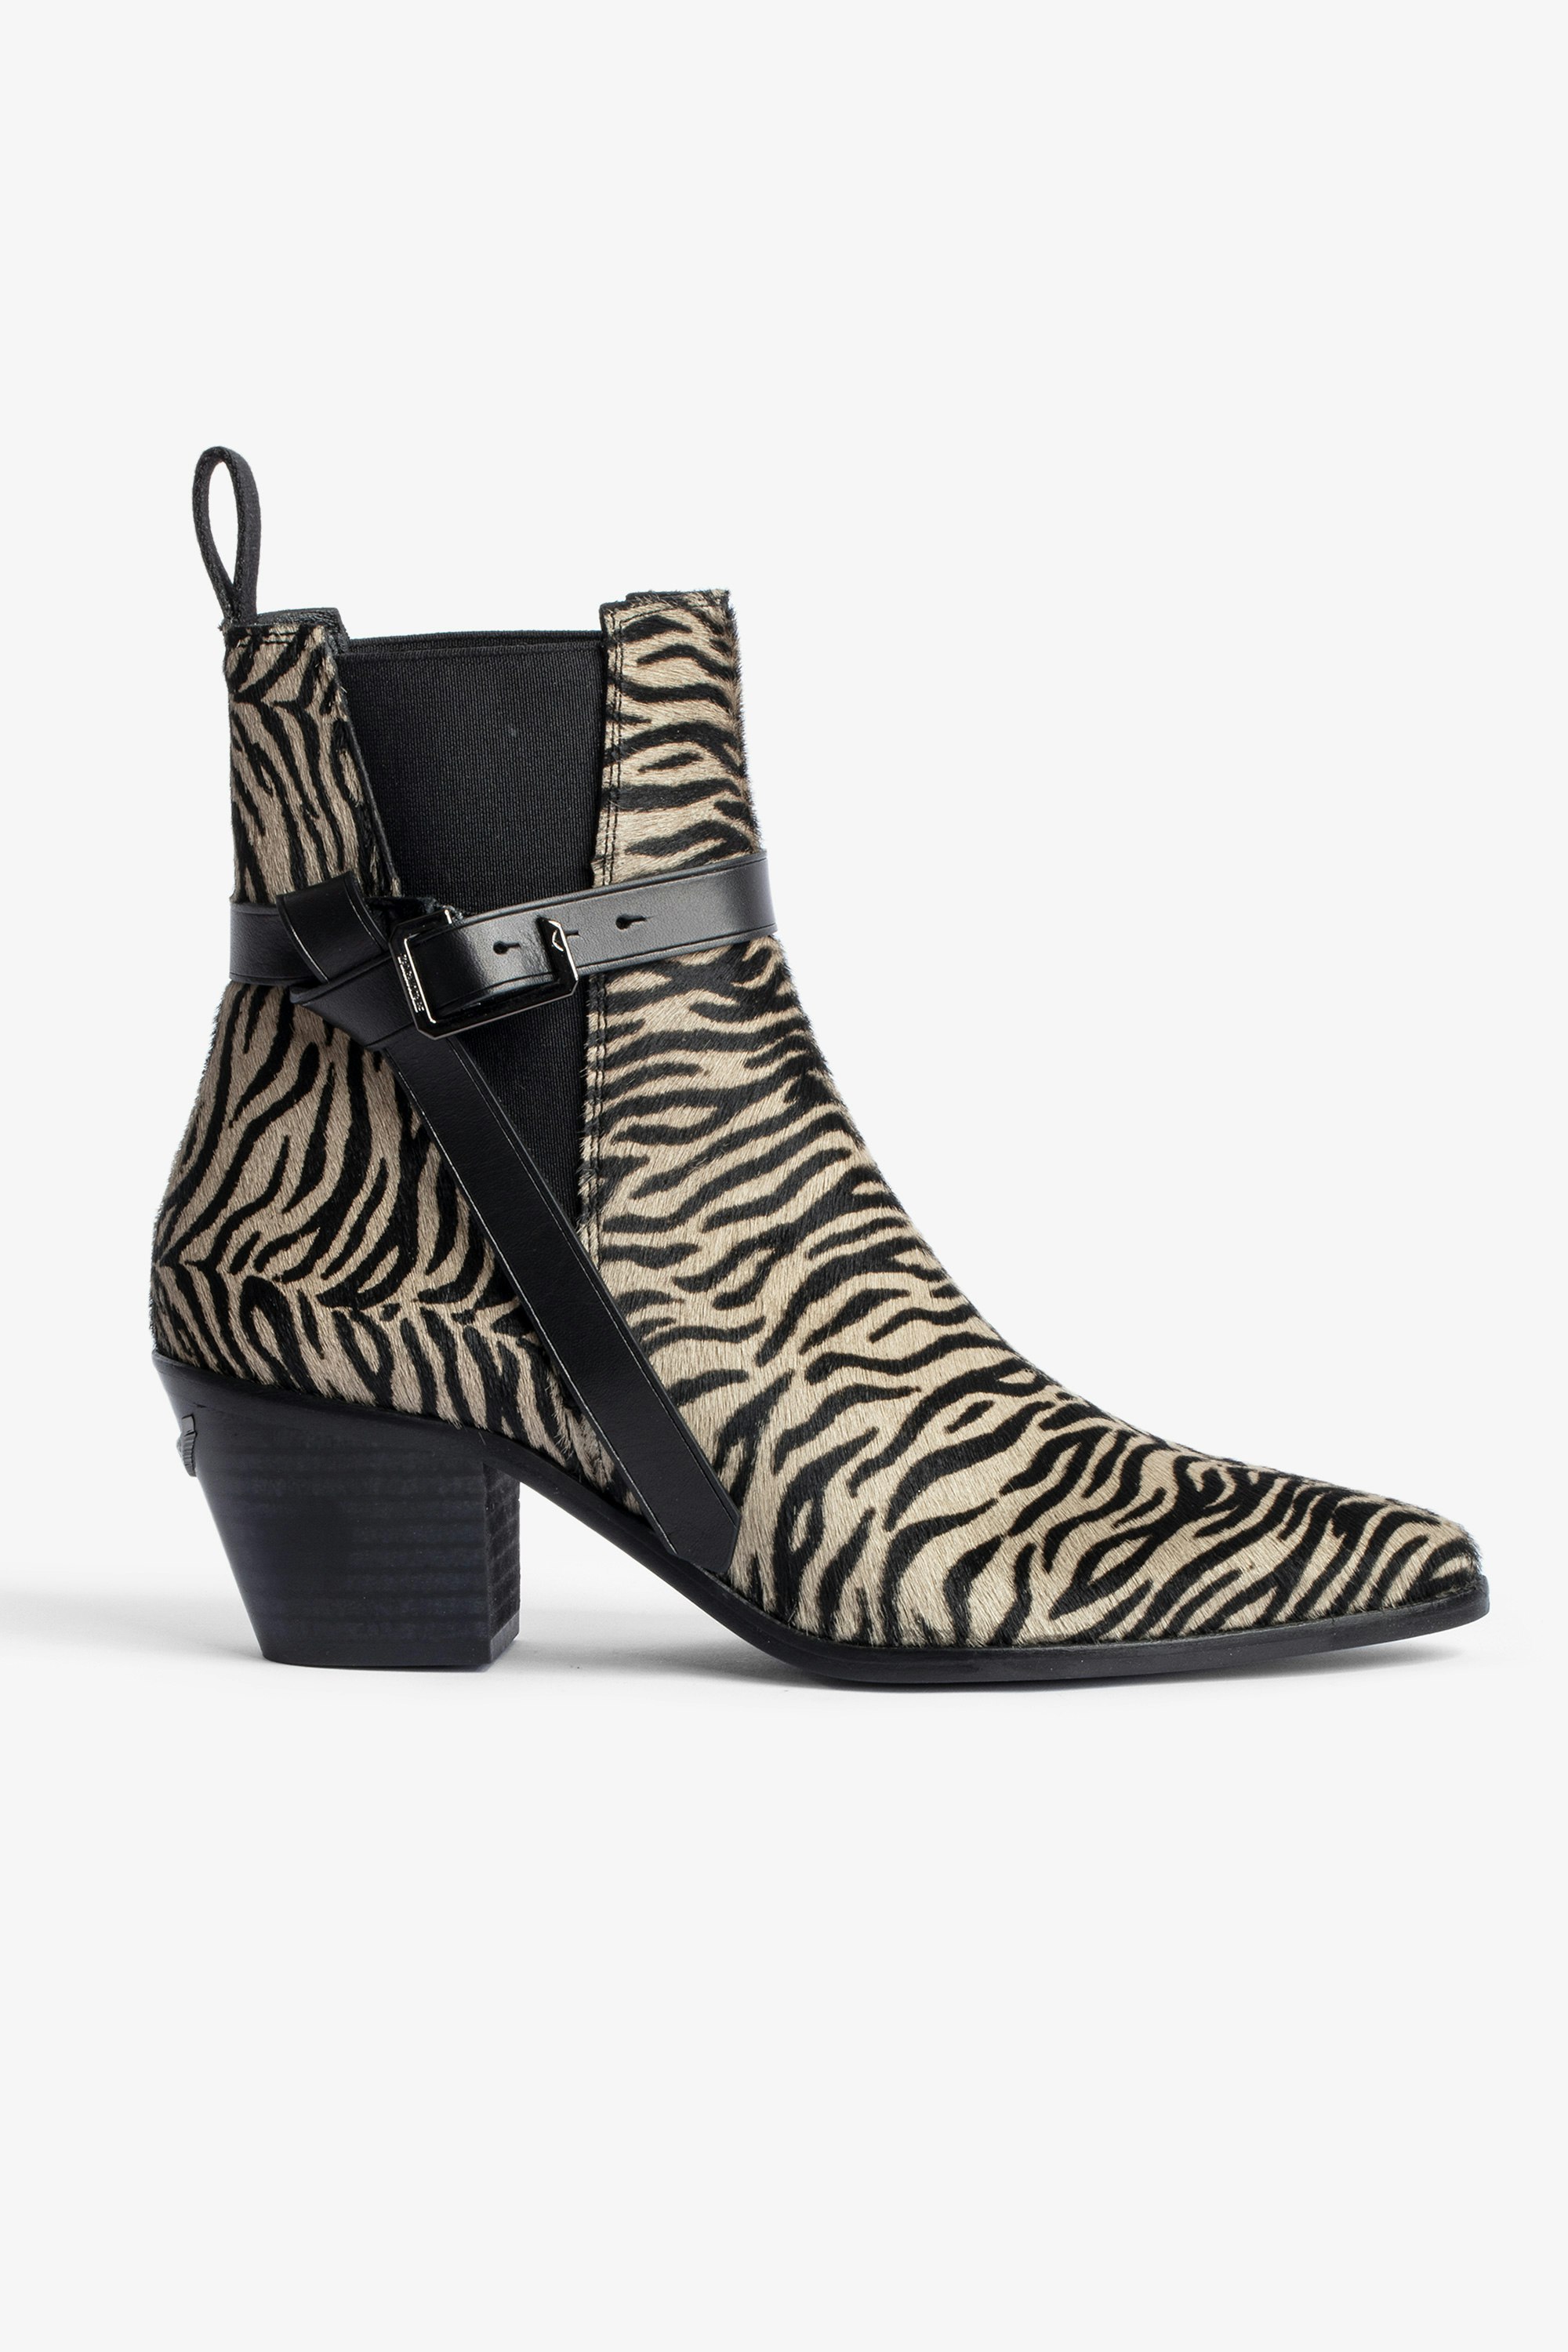 Tyler Ankle Boots Women’s taupe leather ankle boots with contrasting zebra print and adjustable strap